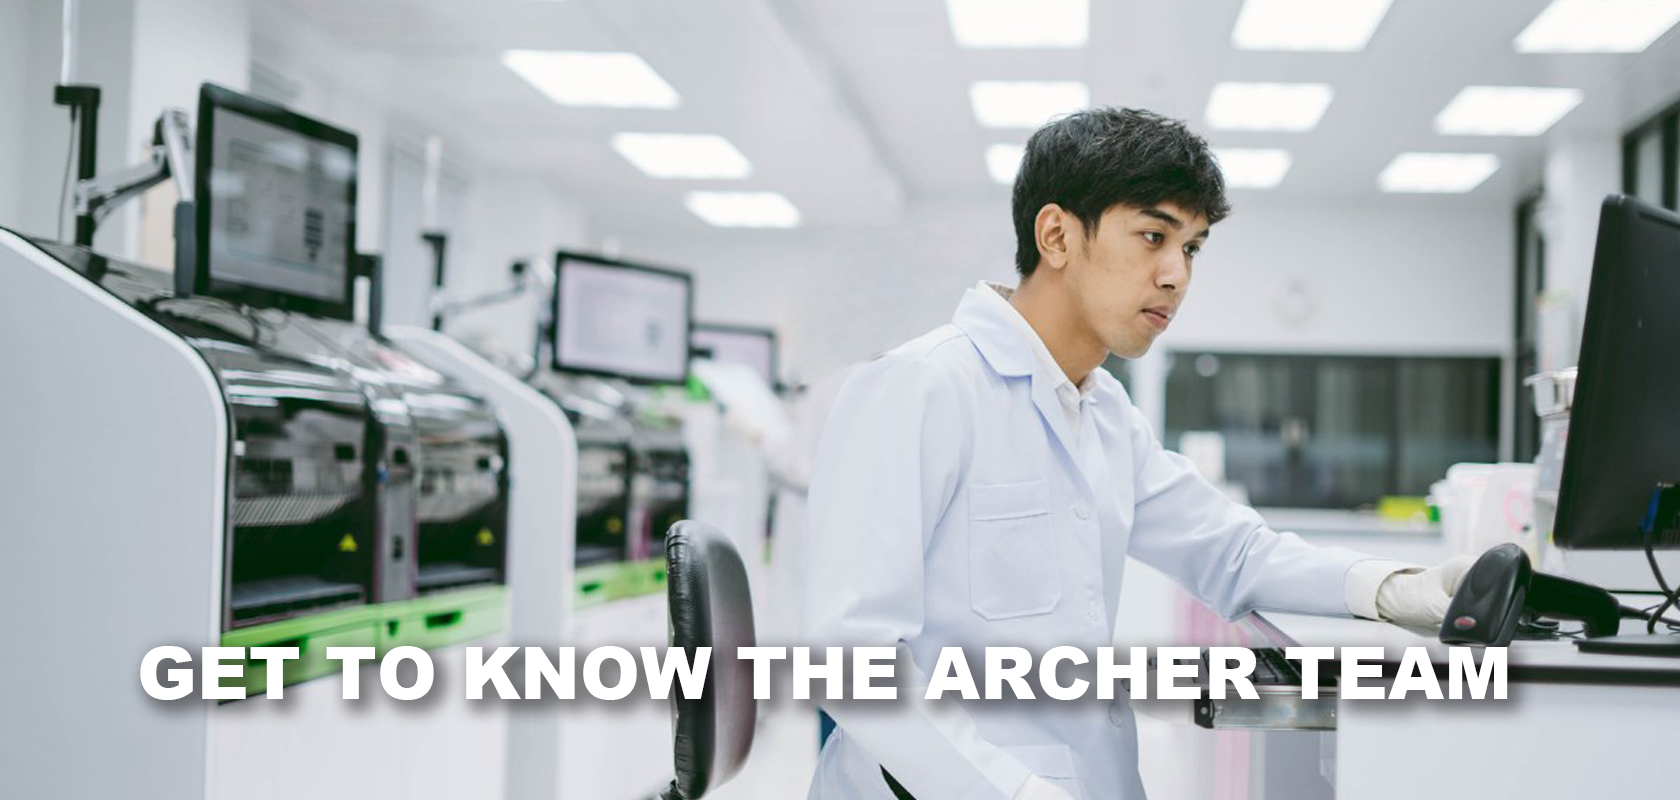 GET TO KNOW THE ARCHER TEAM